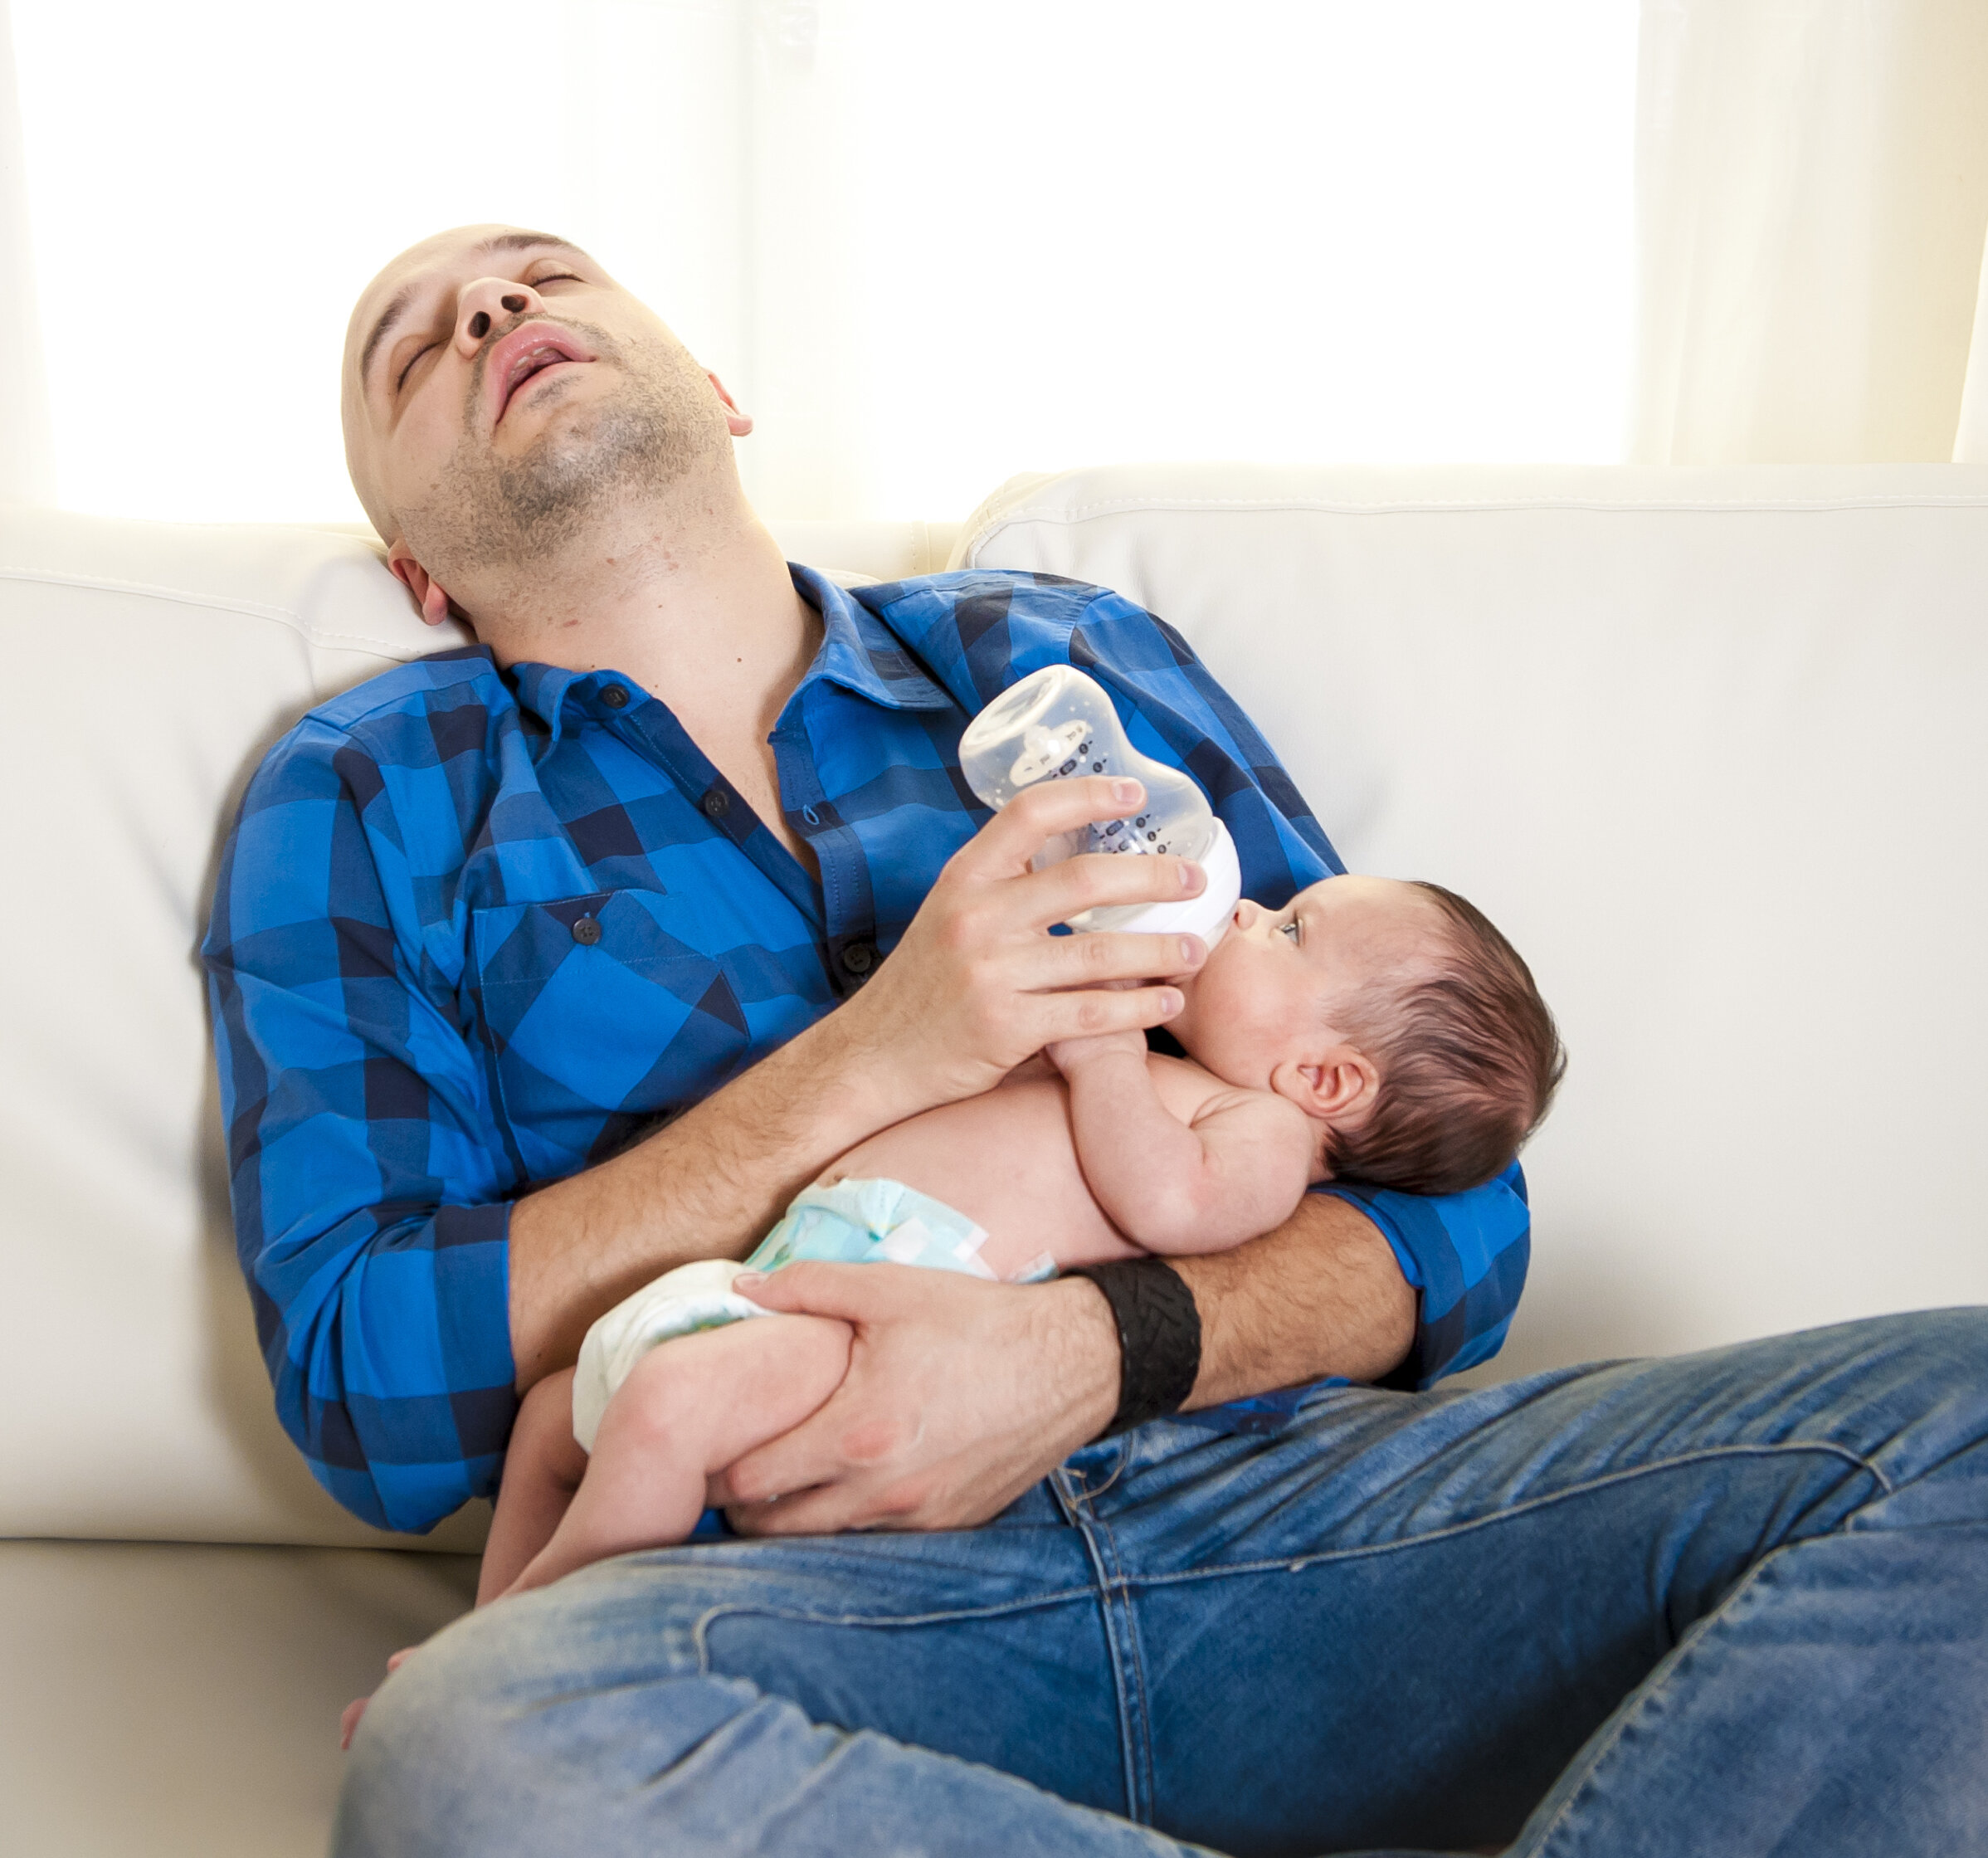 Exhausted dad & Baby copy 2.jpg